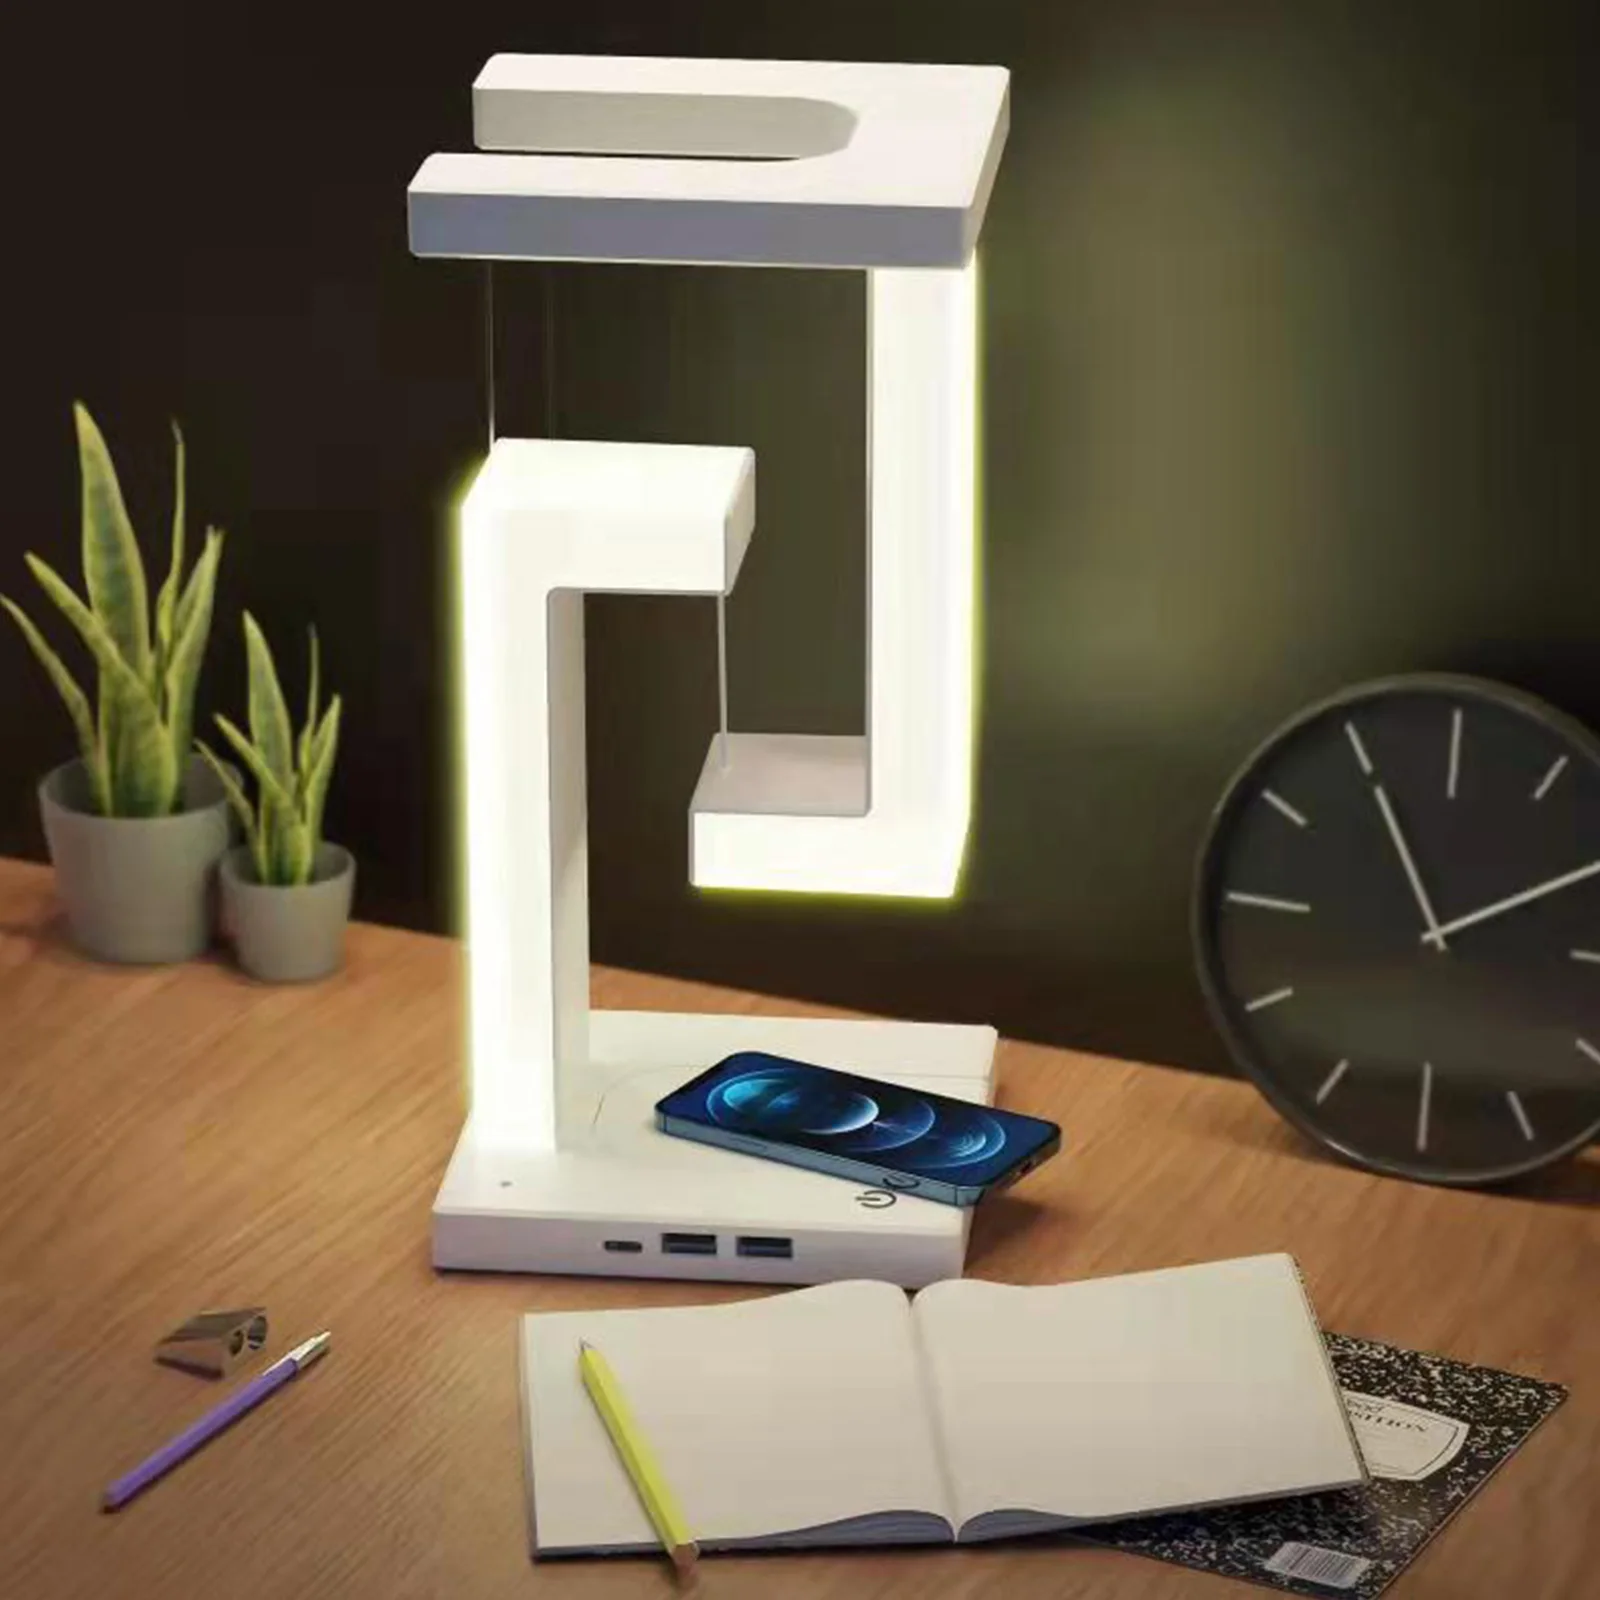 Ng anti gravity night light with 10w wireless charger desk lamp dimmable led table lamp thumb200